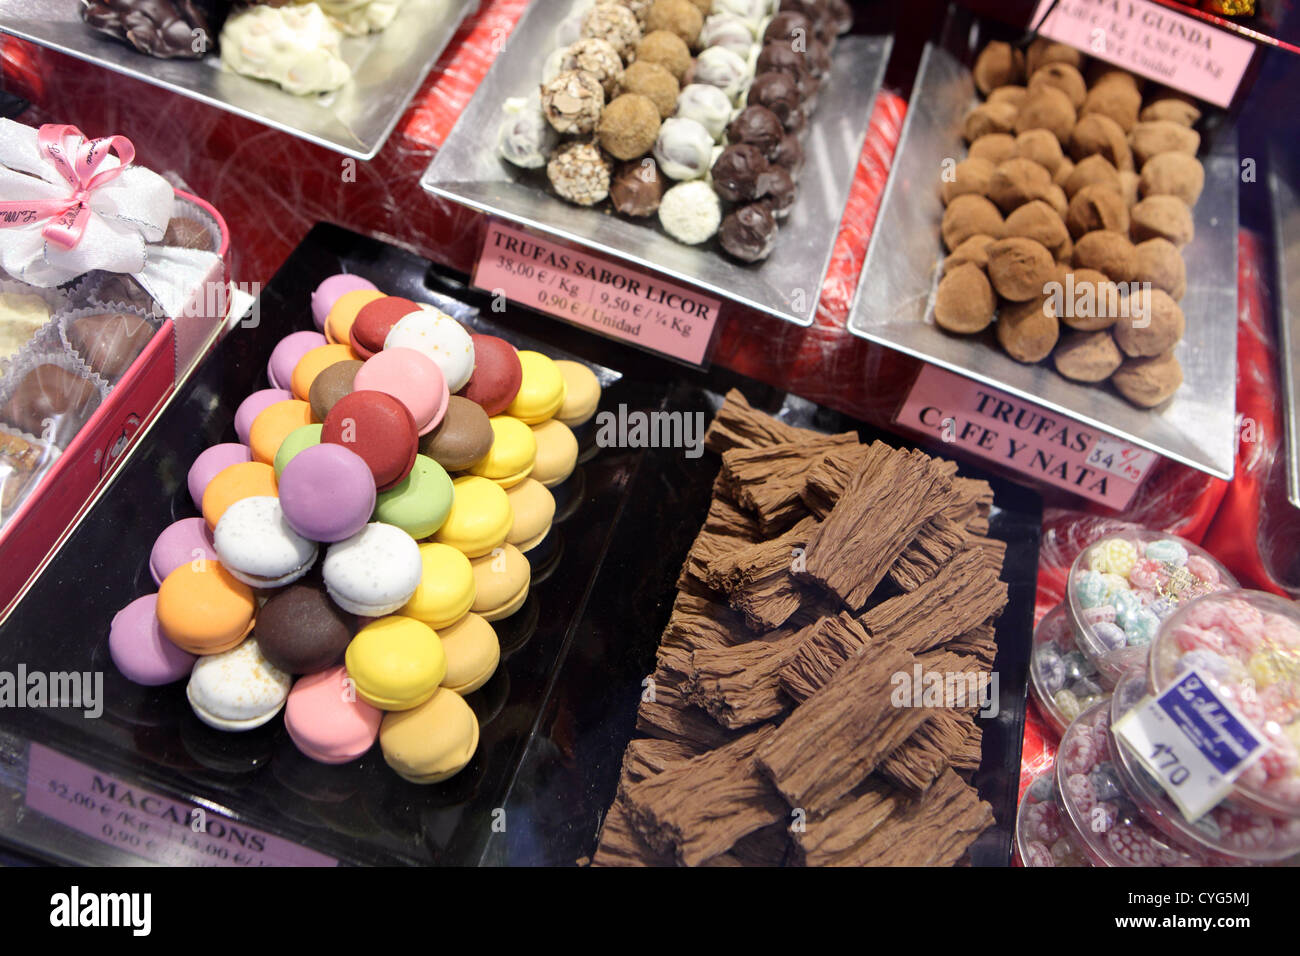 Sweets chocolates for sale sweetshop Pasteleria traditional bakery, Madrid, Spain Stock Photo